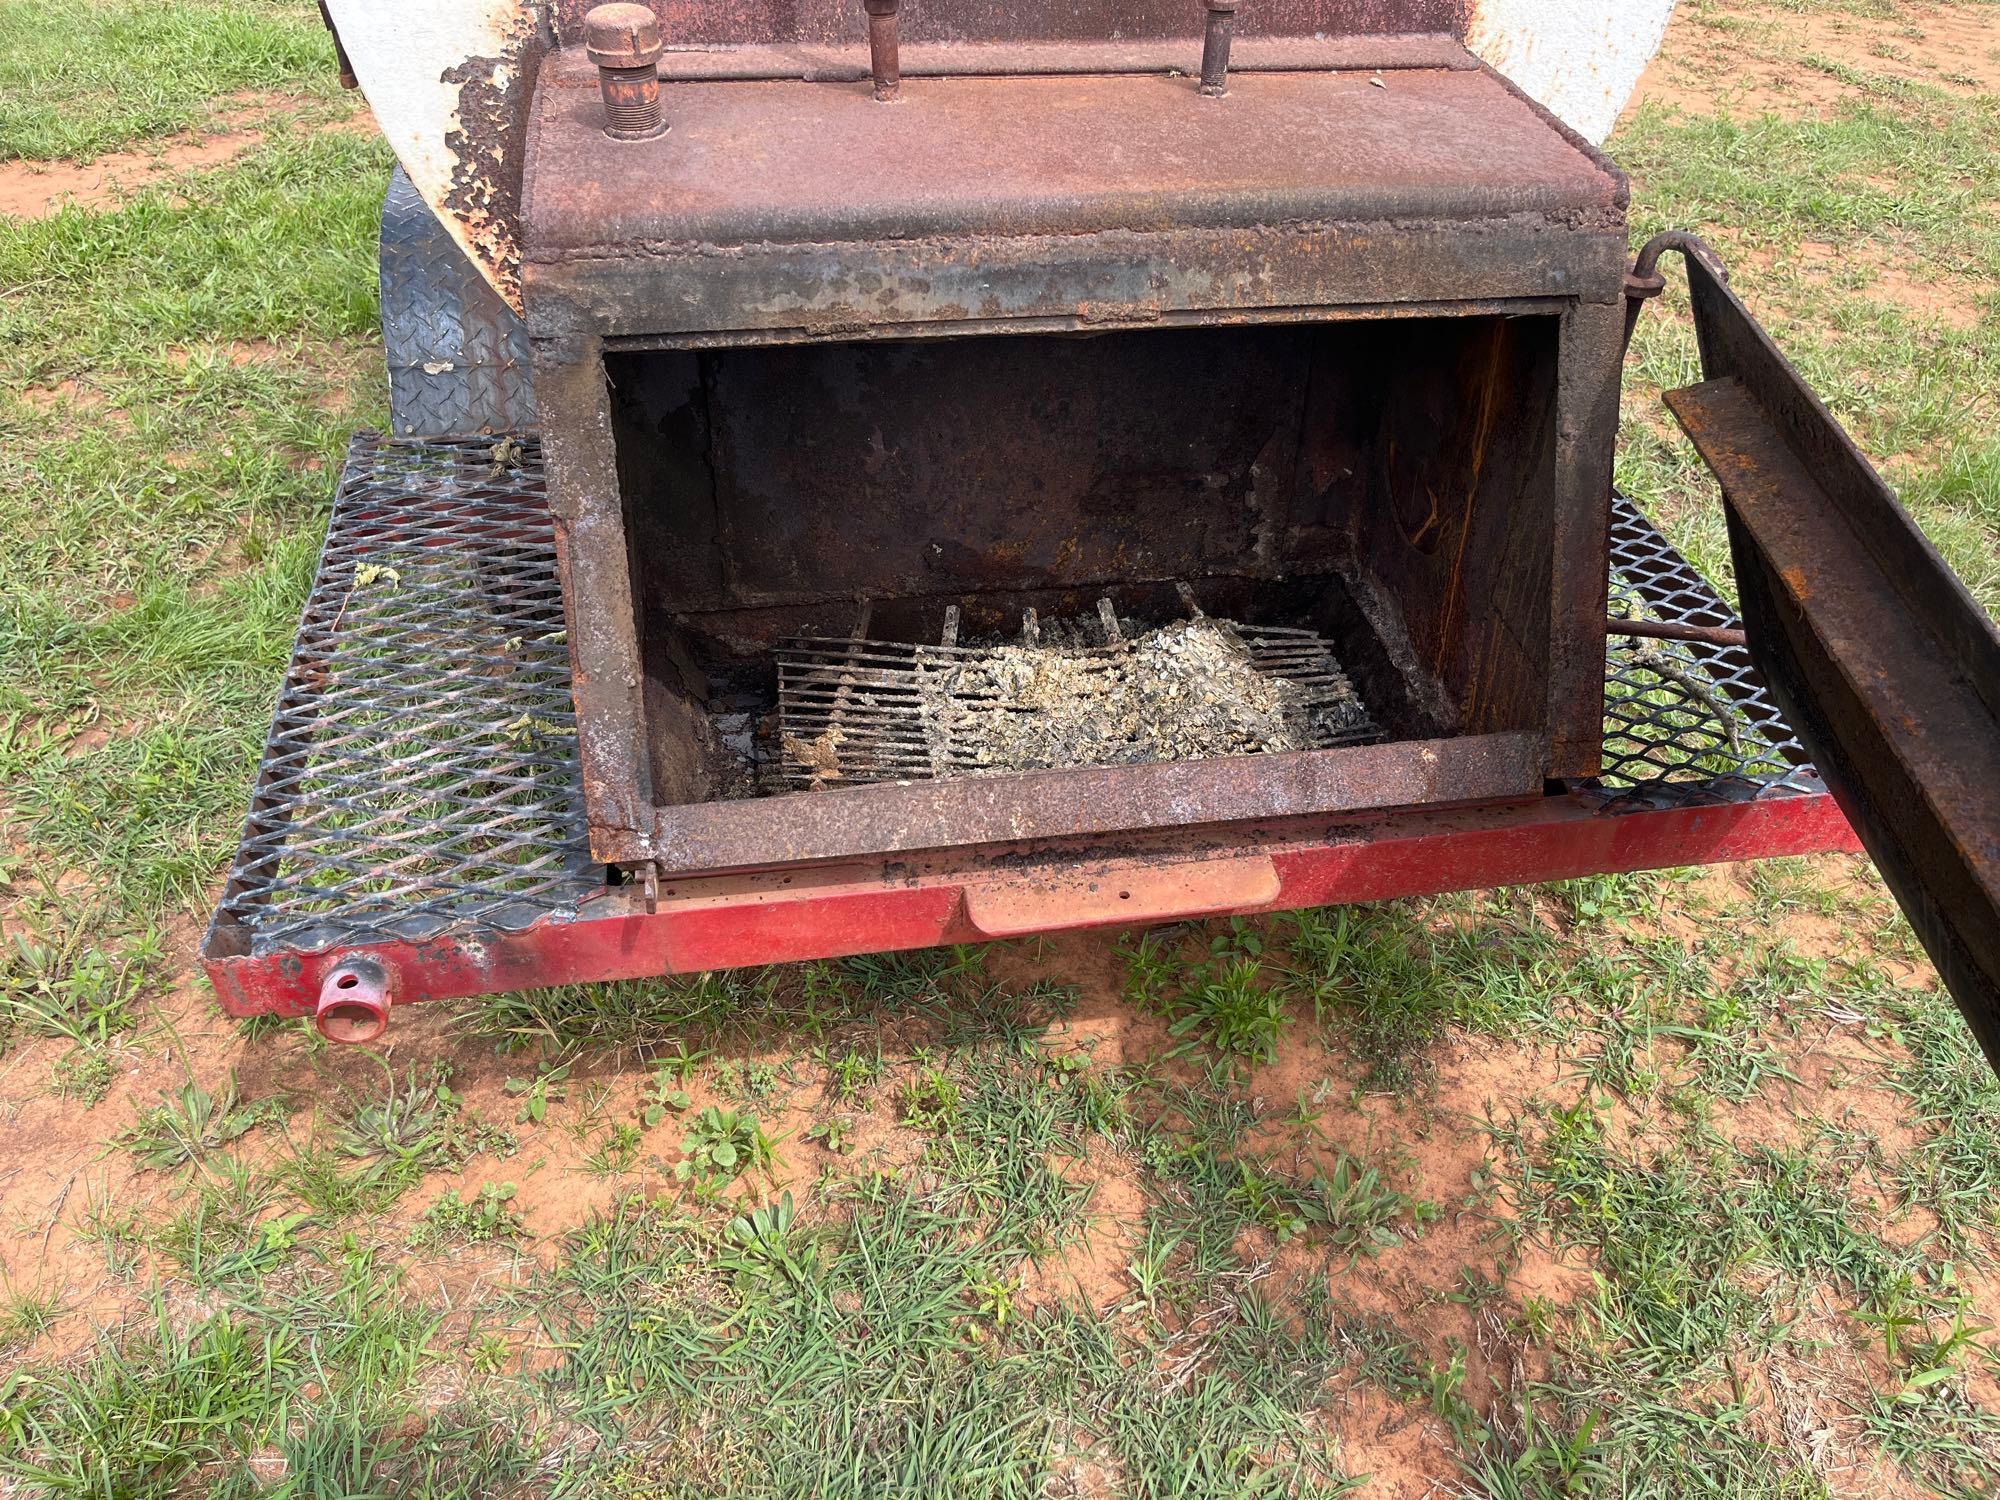 large wood smoker on a trailer